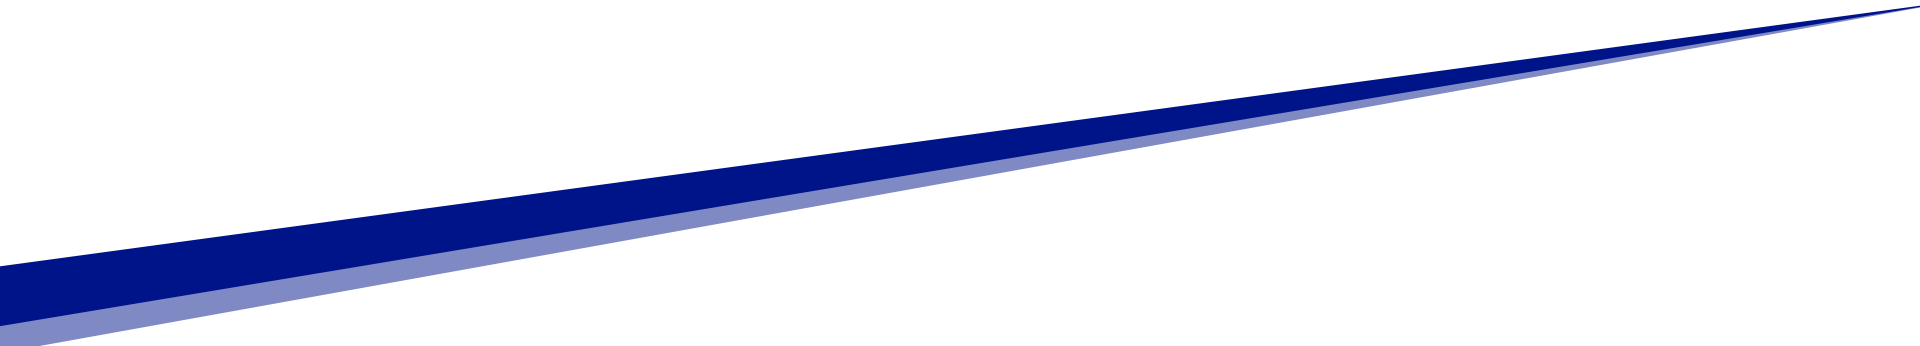 A blue and white arrow on a white background.